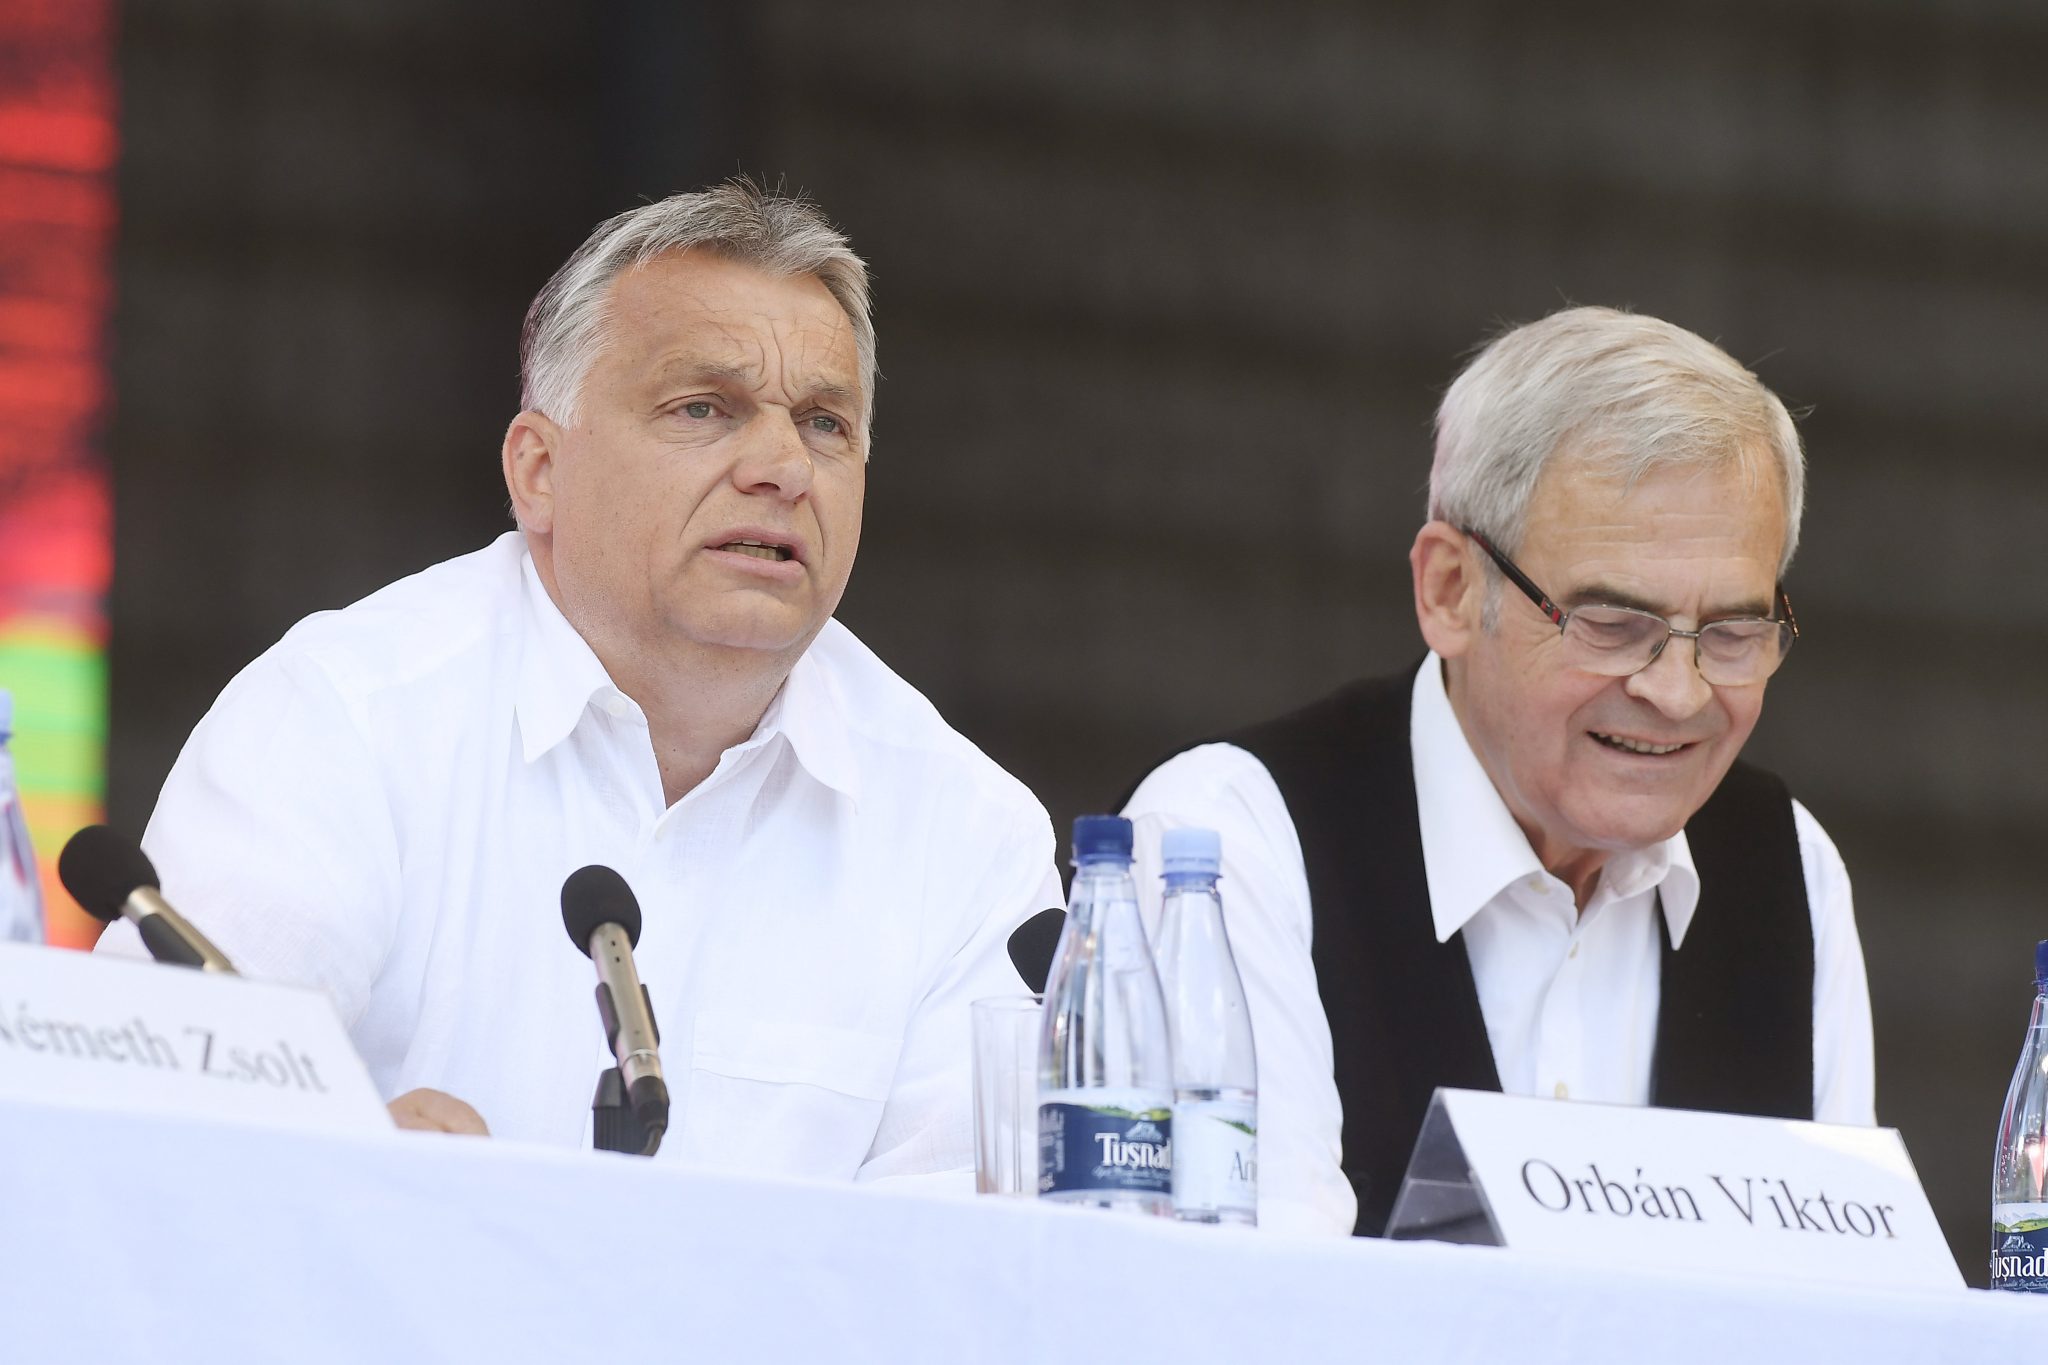 Orbán: Hungary Says 'Yes' to Democracy, 'No' to Liberalism